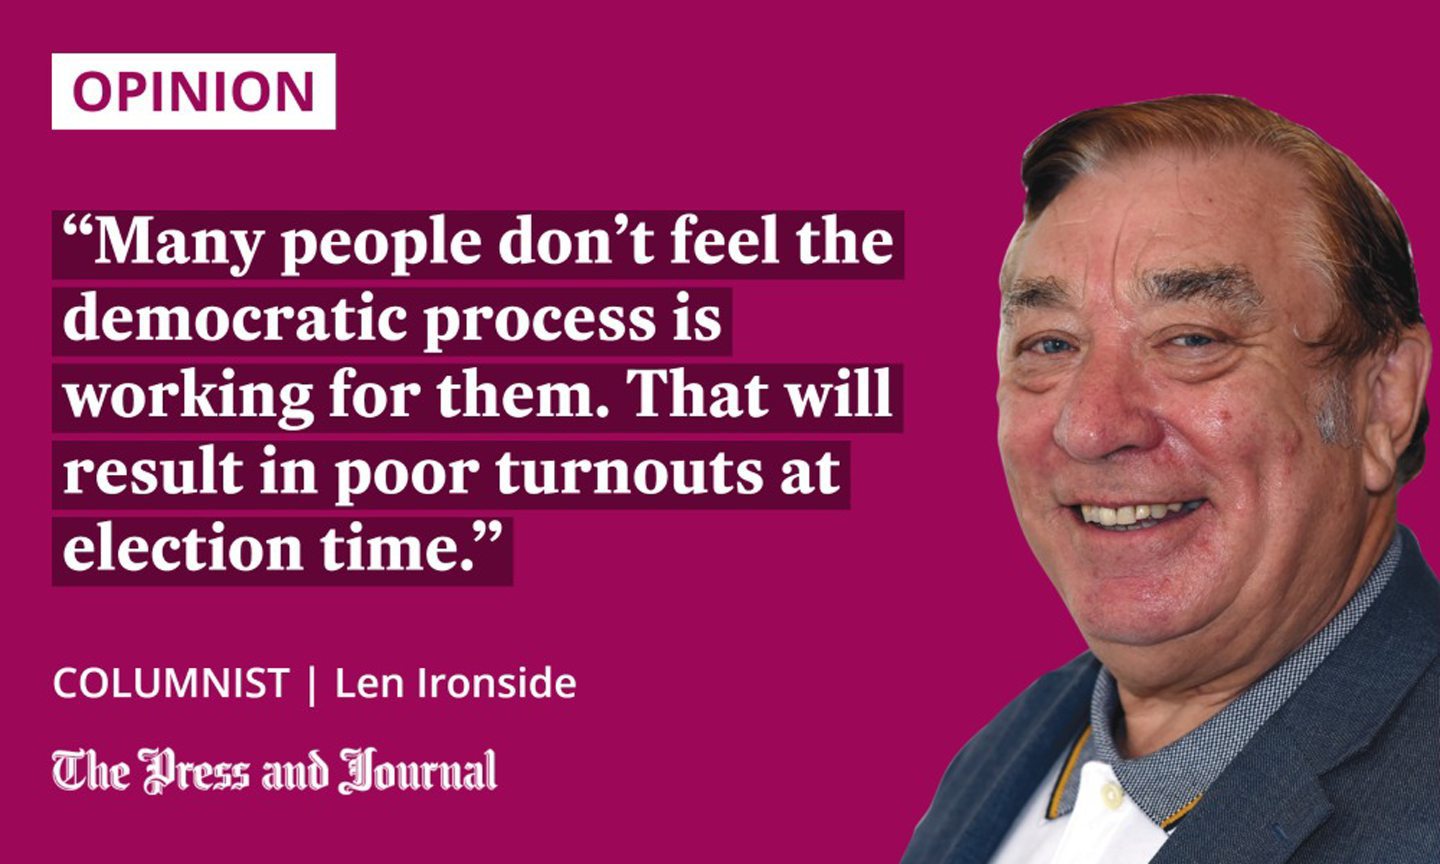 Columnist, Len Ironside: "many people don't feel the democratic process is working for them. That will result in poor turnouts at election time."